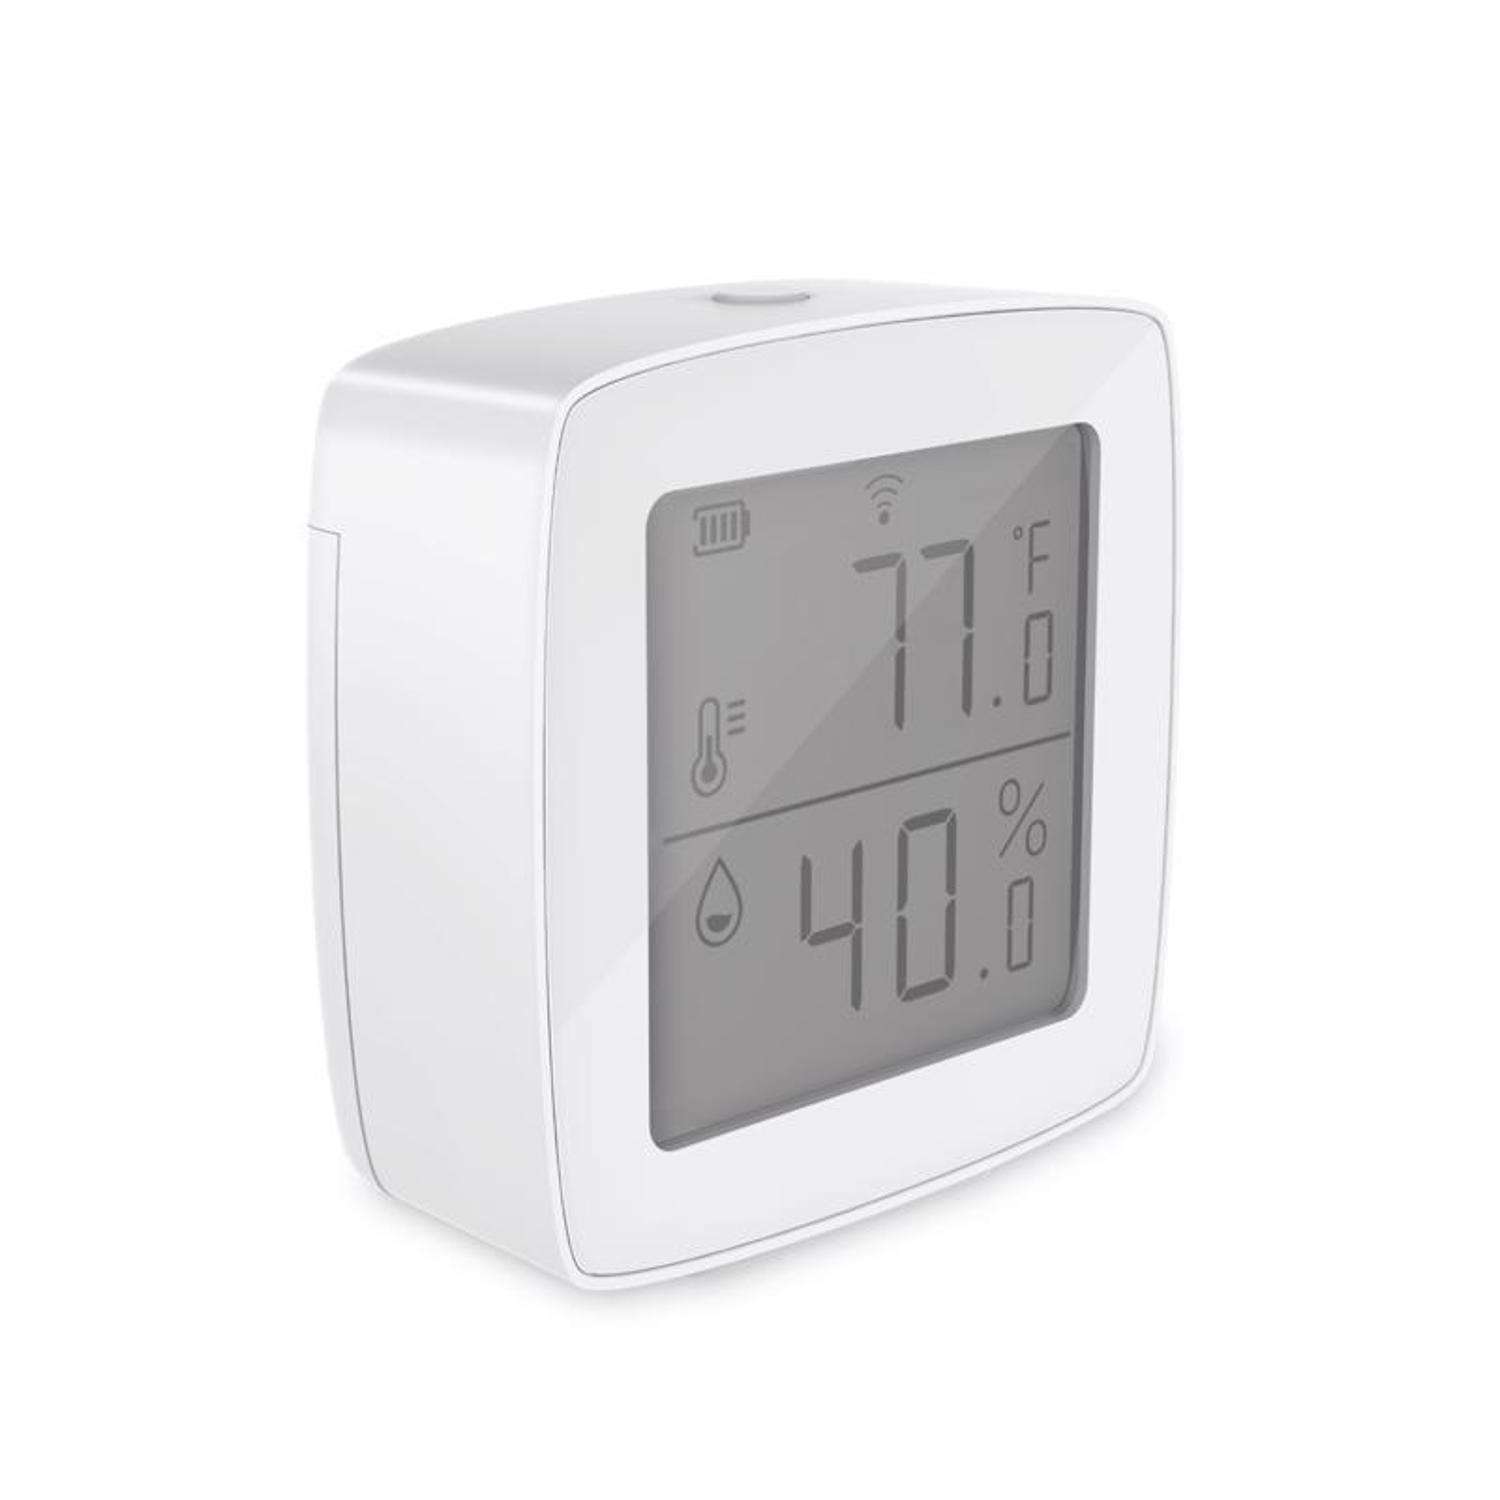 Feit Electric Built in WiFi Heating and Cooling Push Buttons Temperature & Humidity Sensor